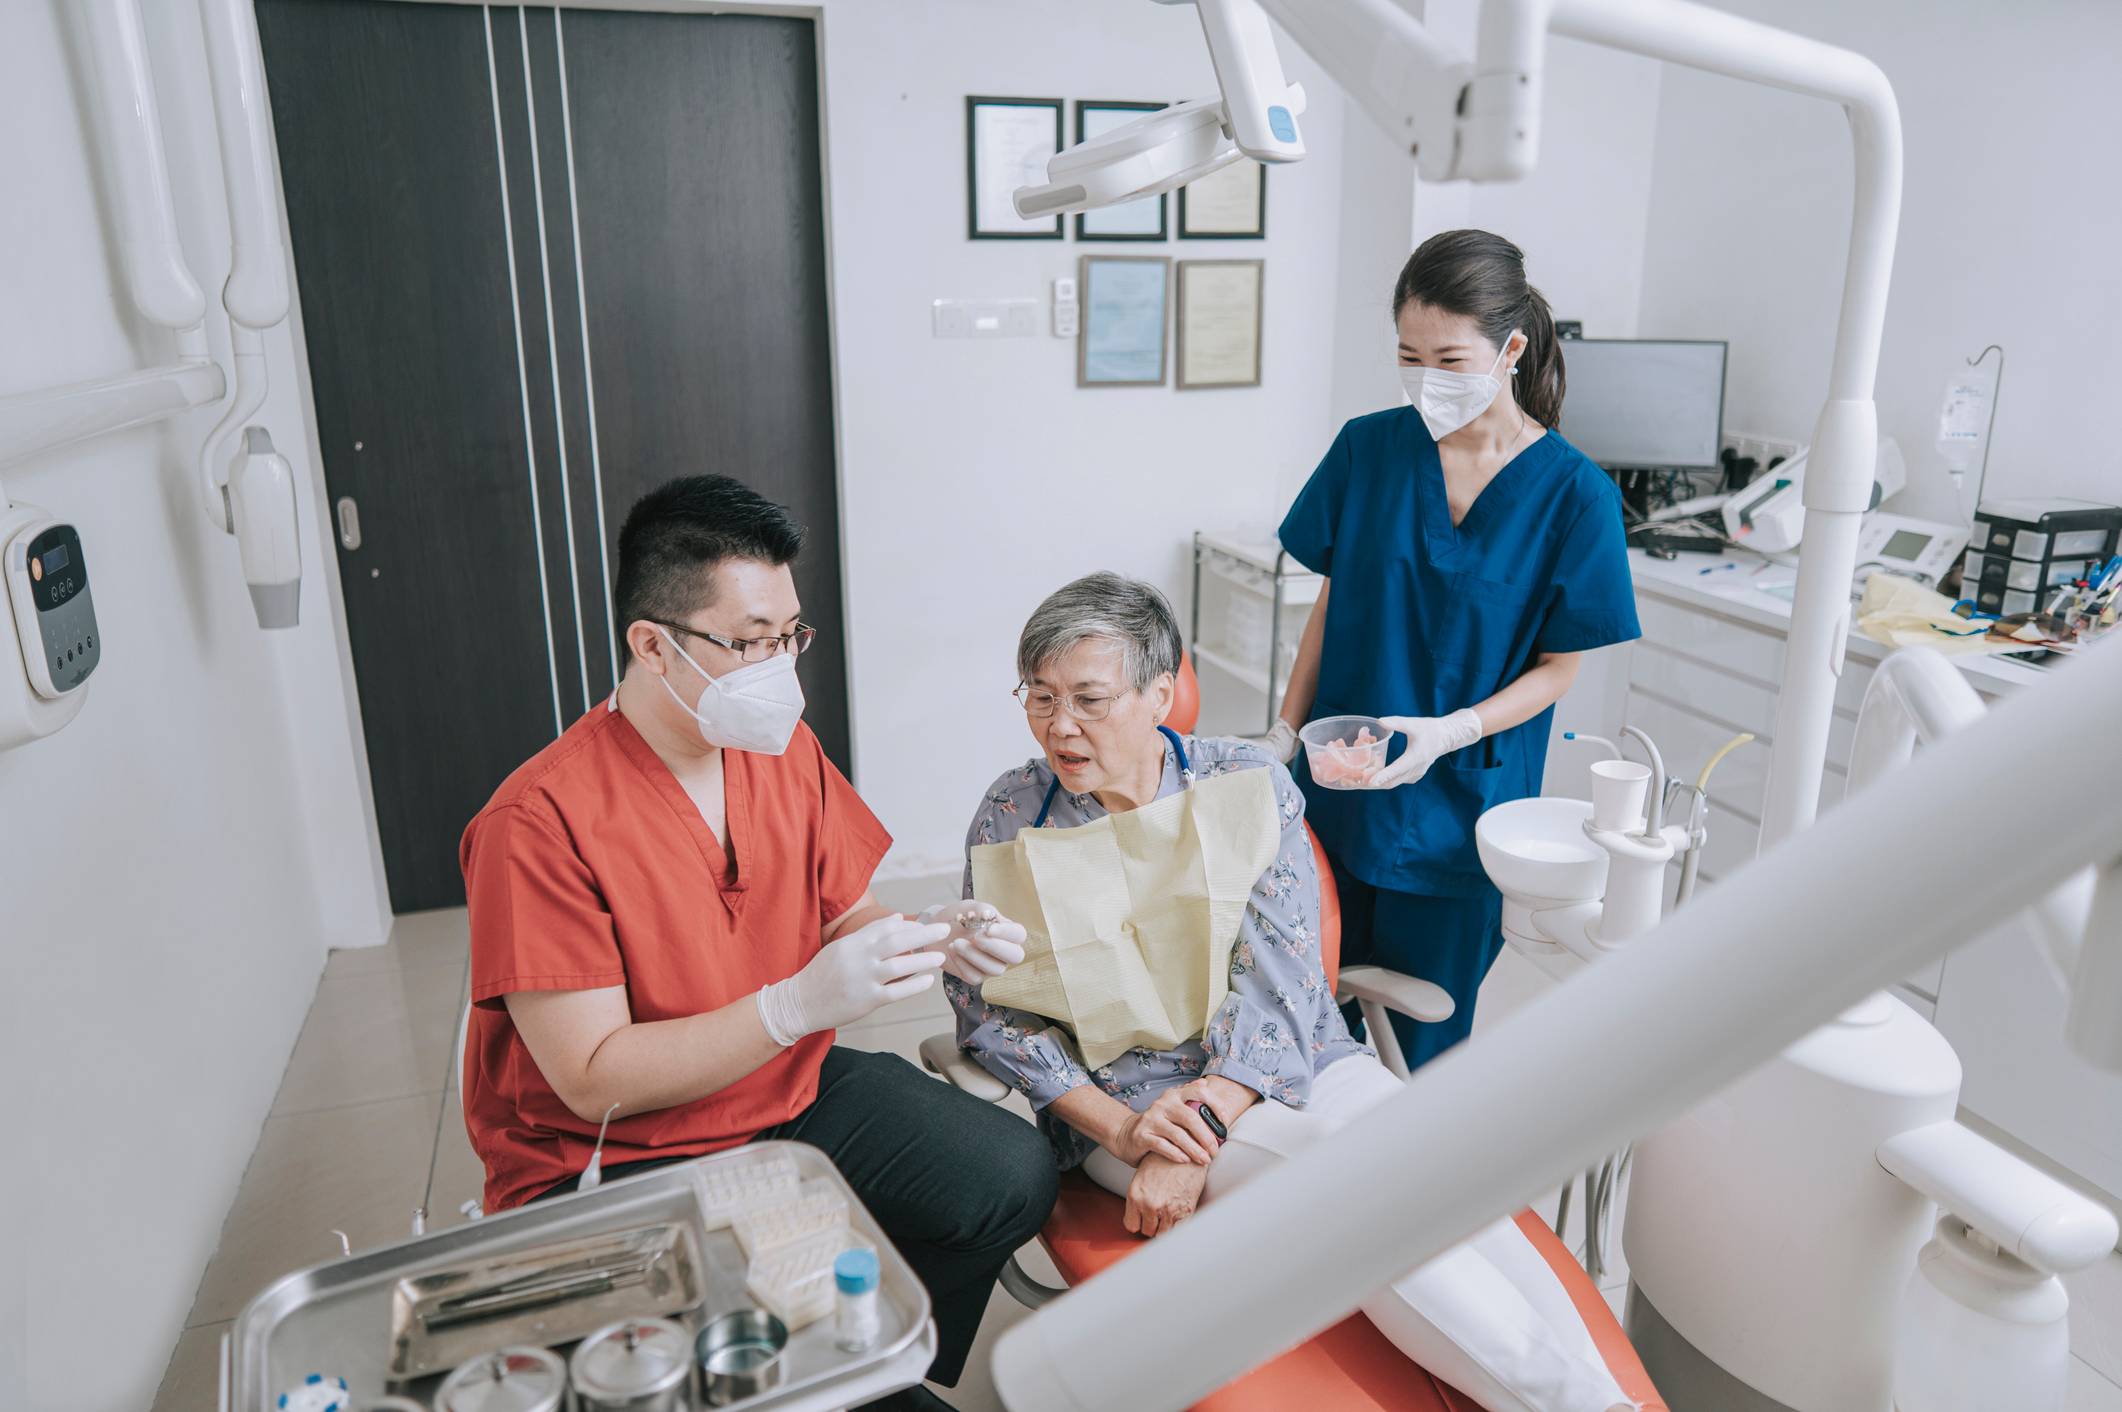 Dental Vision Hearing insurance : what it’s all about